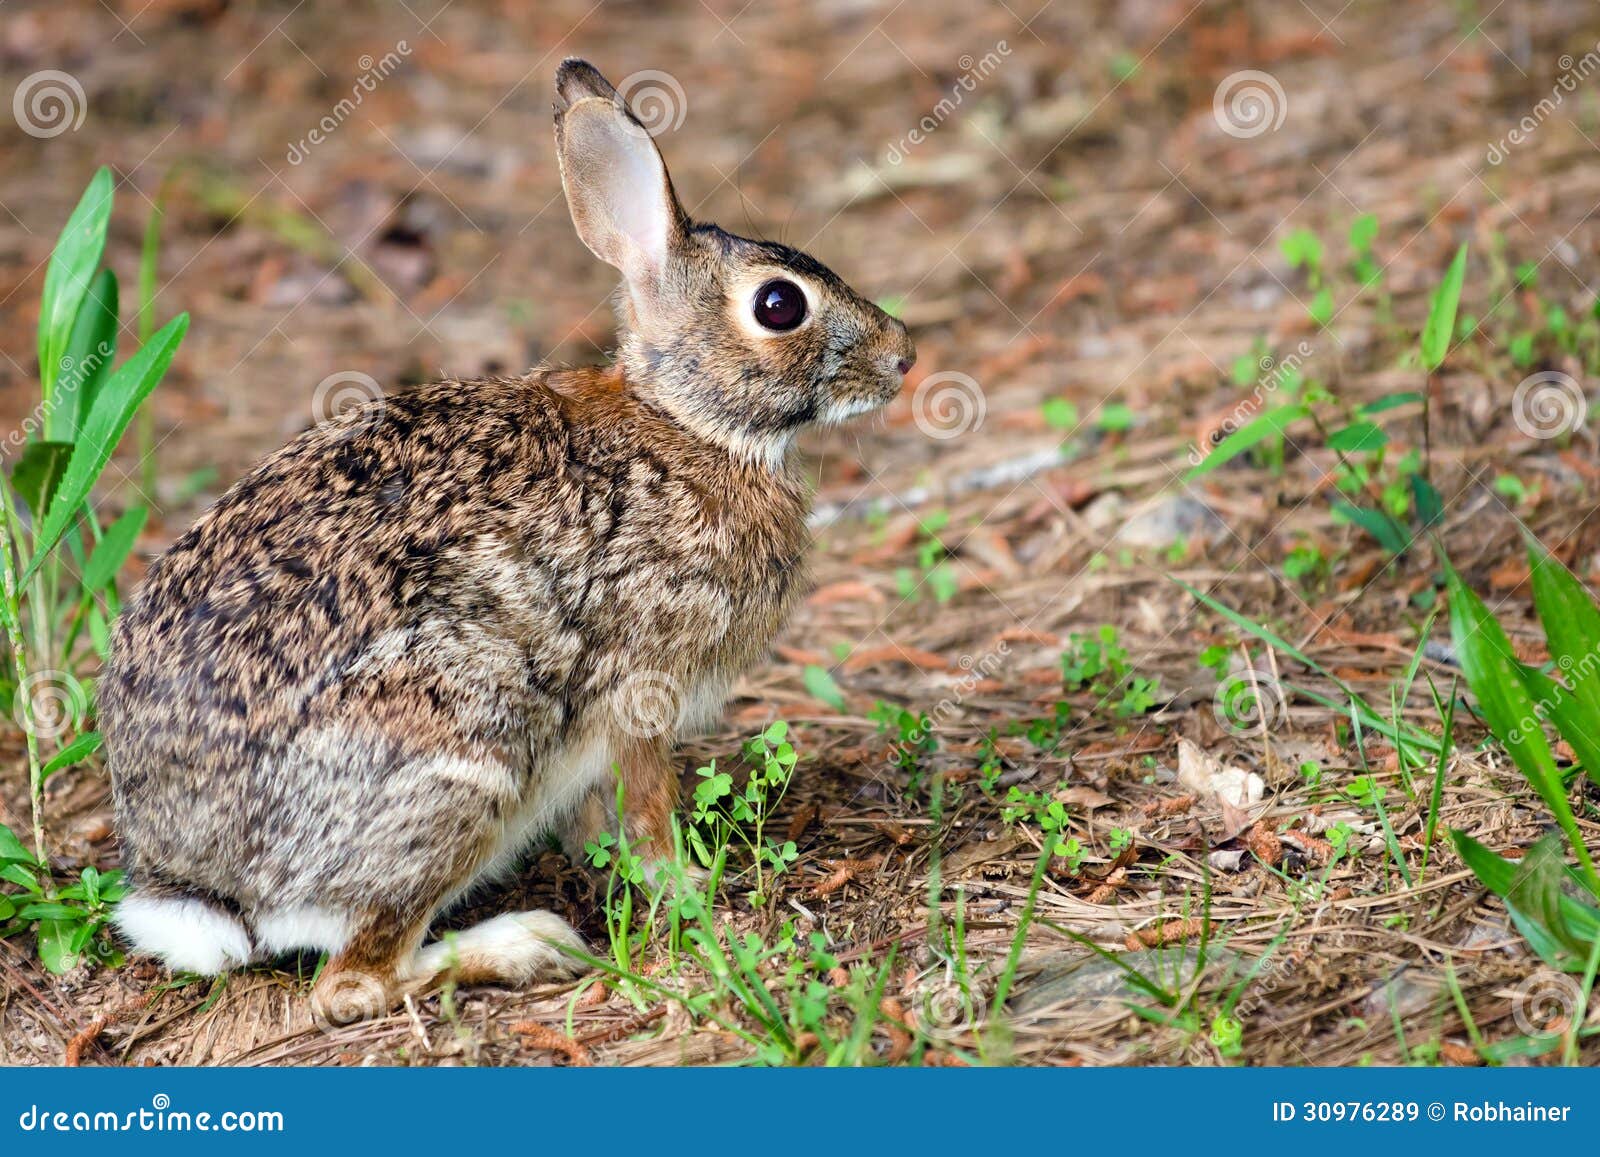 wild eastern cottontail rabbit, sylvilagus floridanus, in forest